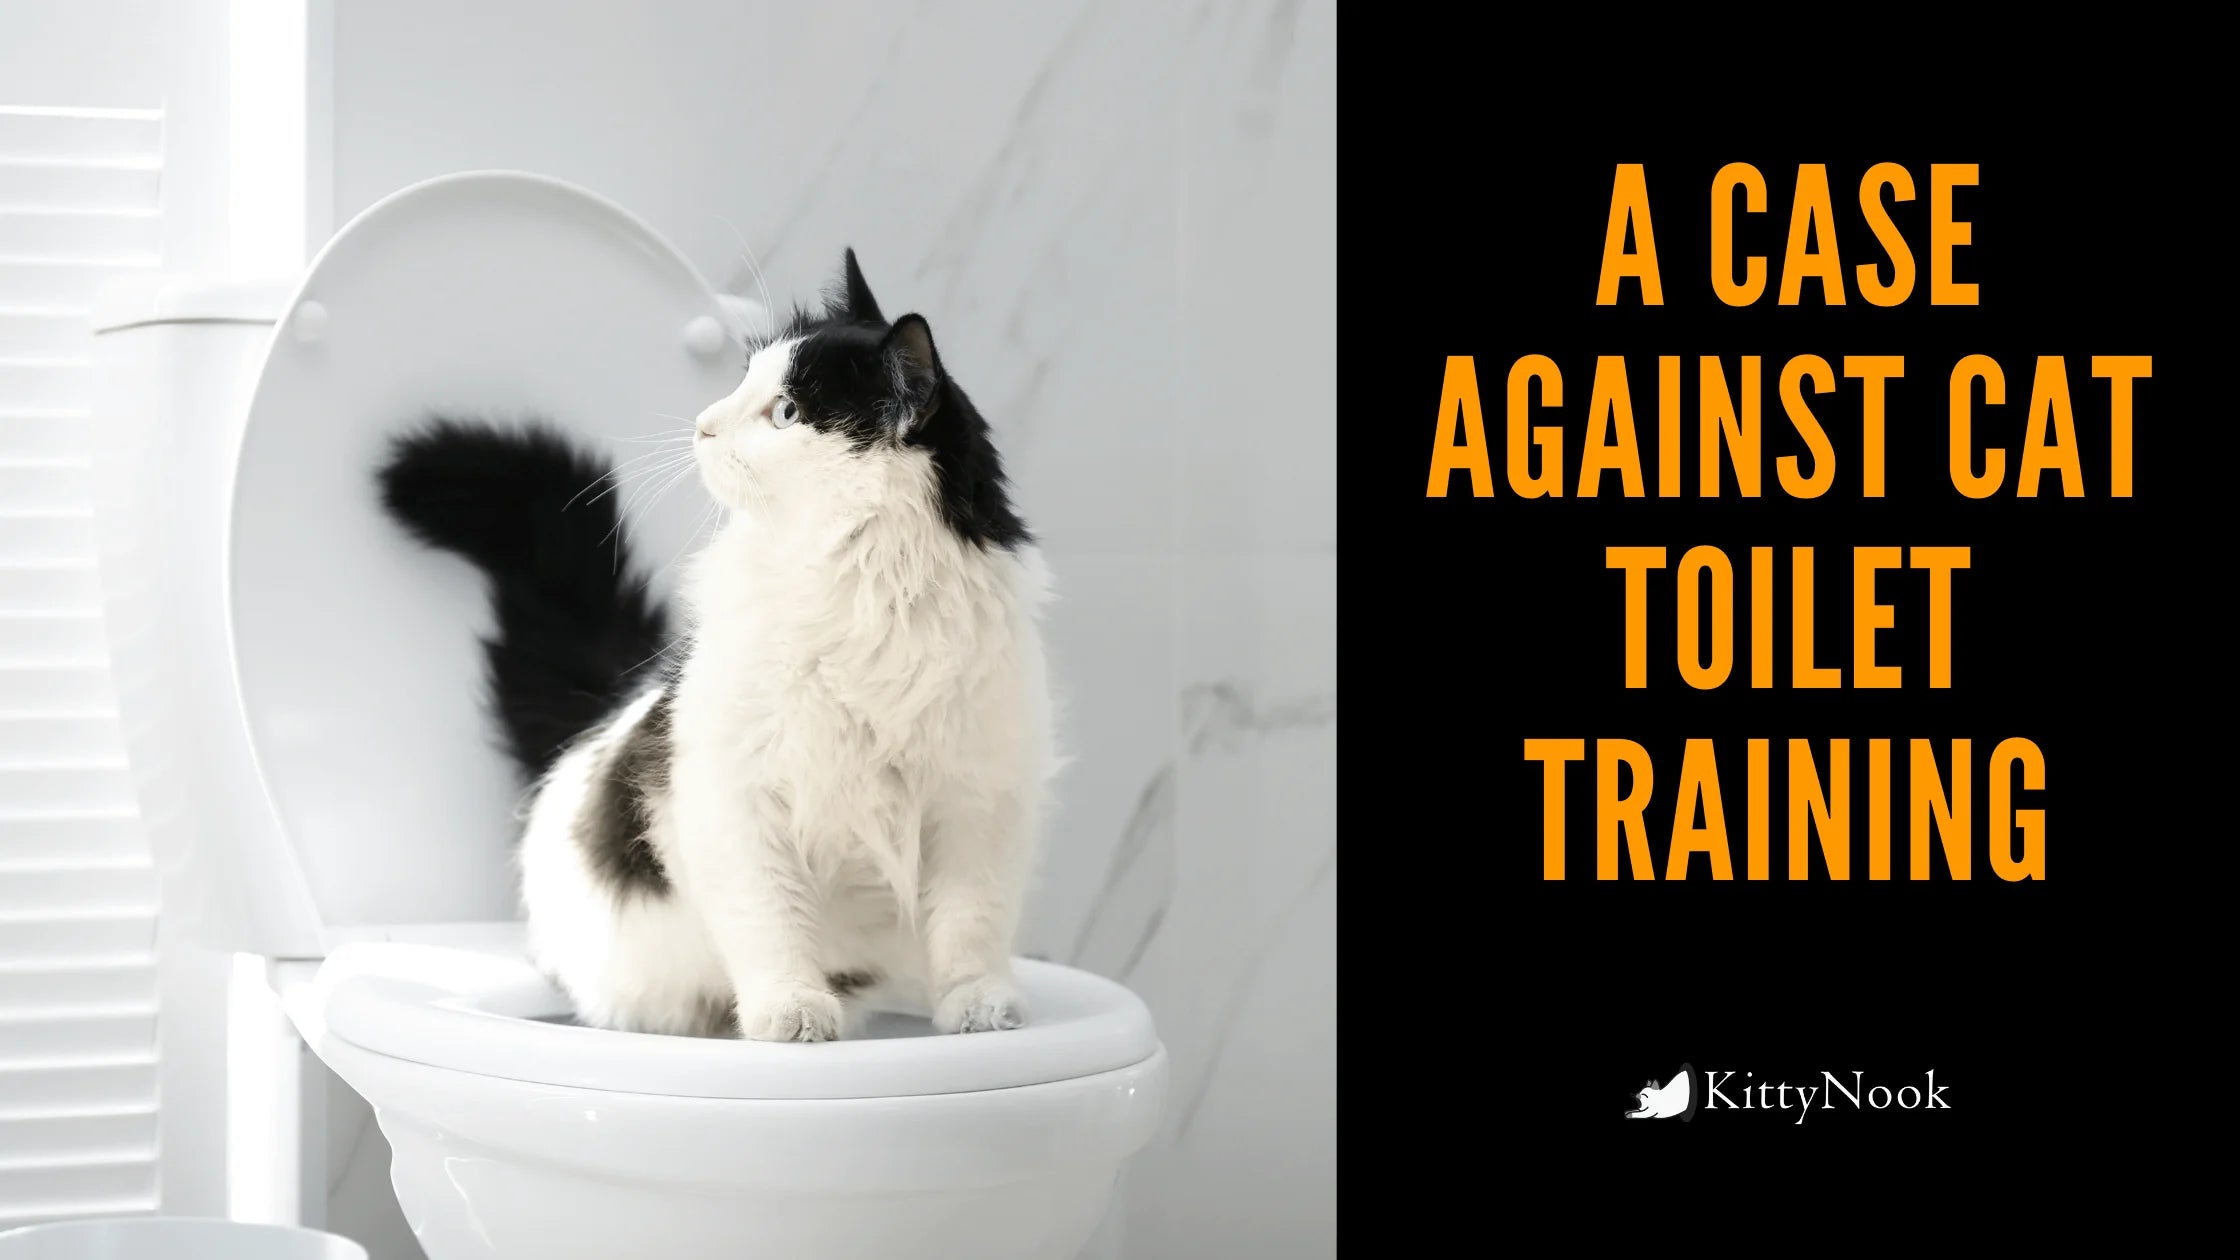 A Case Against Cat Toilet Training: 6 Reasons Not To Toilet Train Your Cat - KittyNook Cat Company